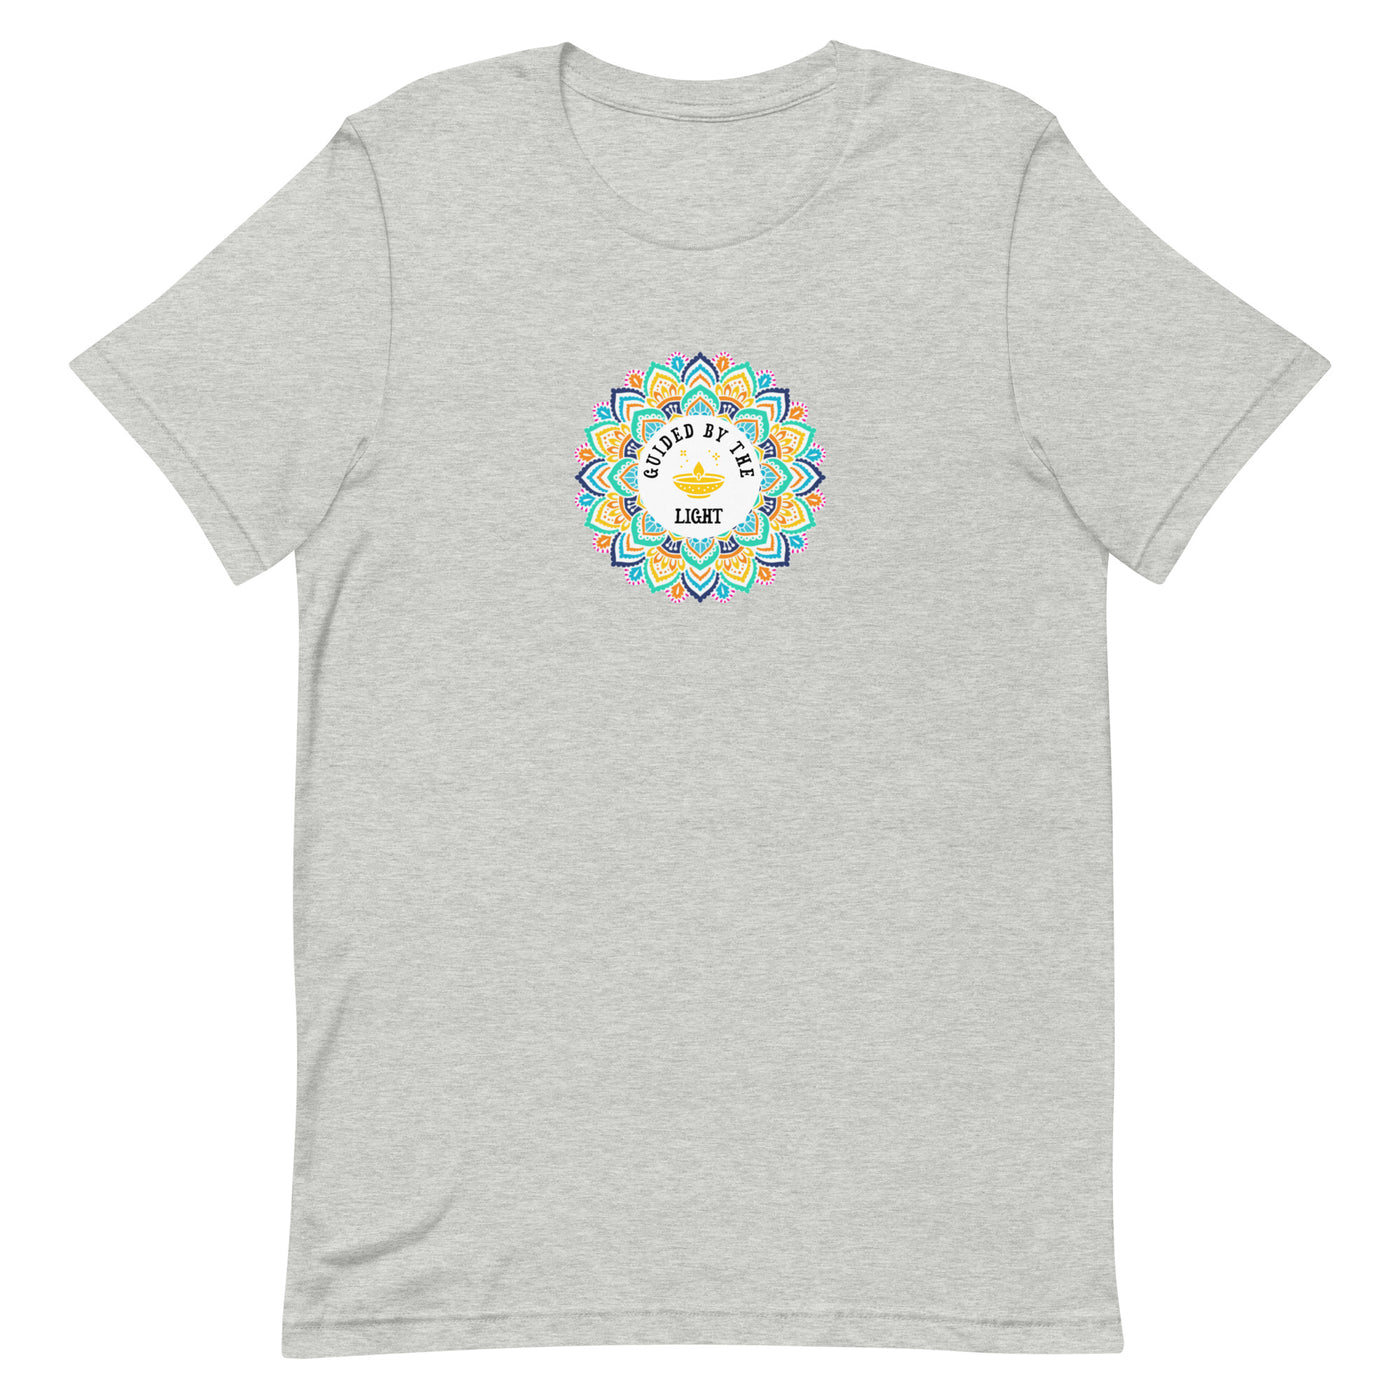 GUIDED BY THE LIGHT - DIWALI | UNISEX T-SHIRT FOR ADULTS